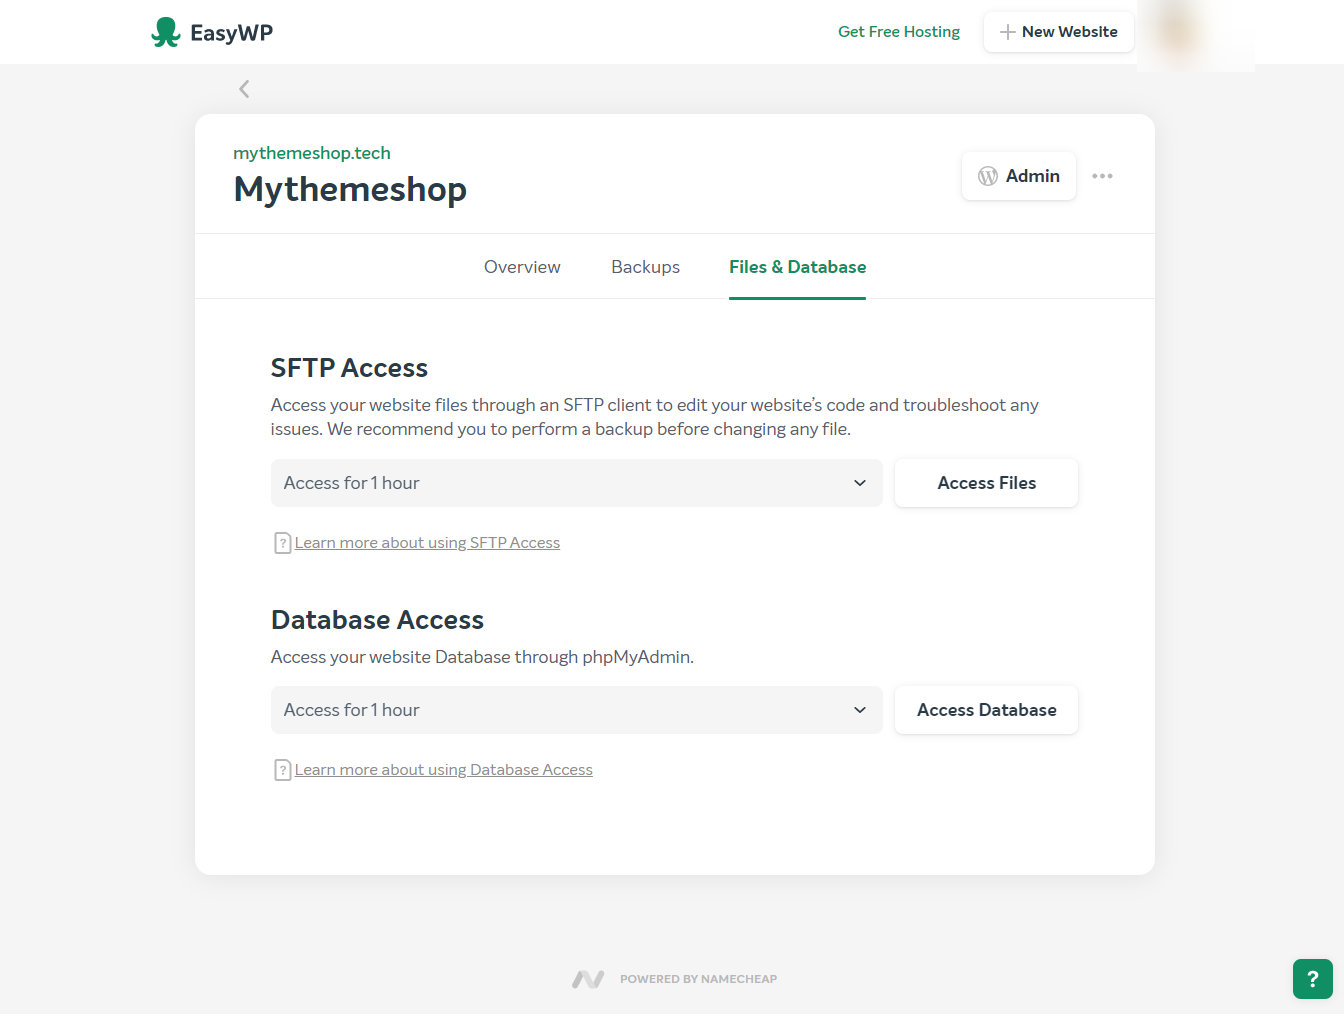 easywp files and database access options